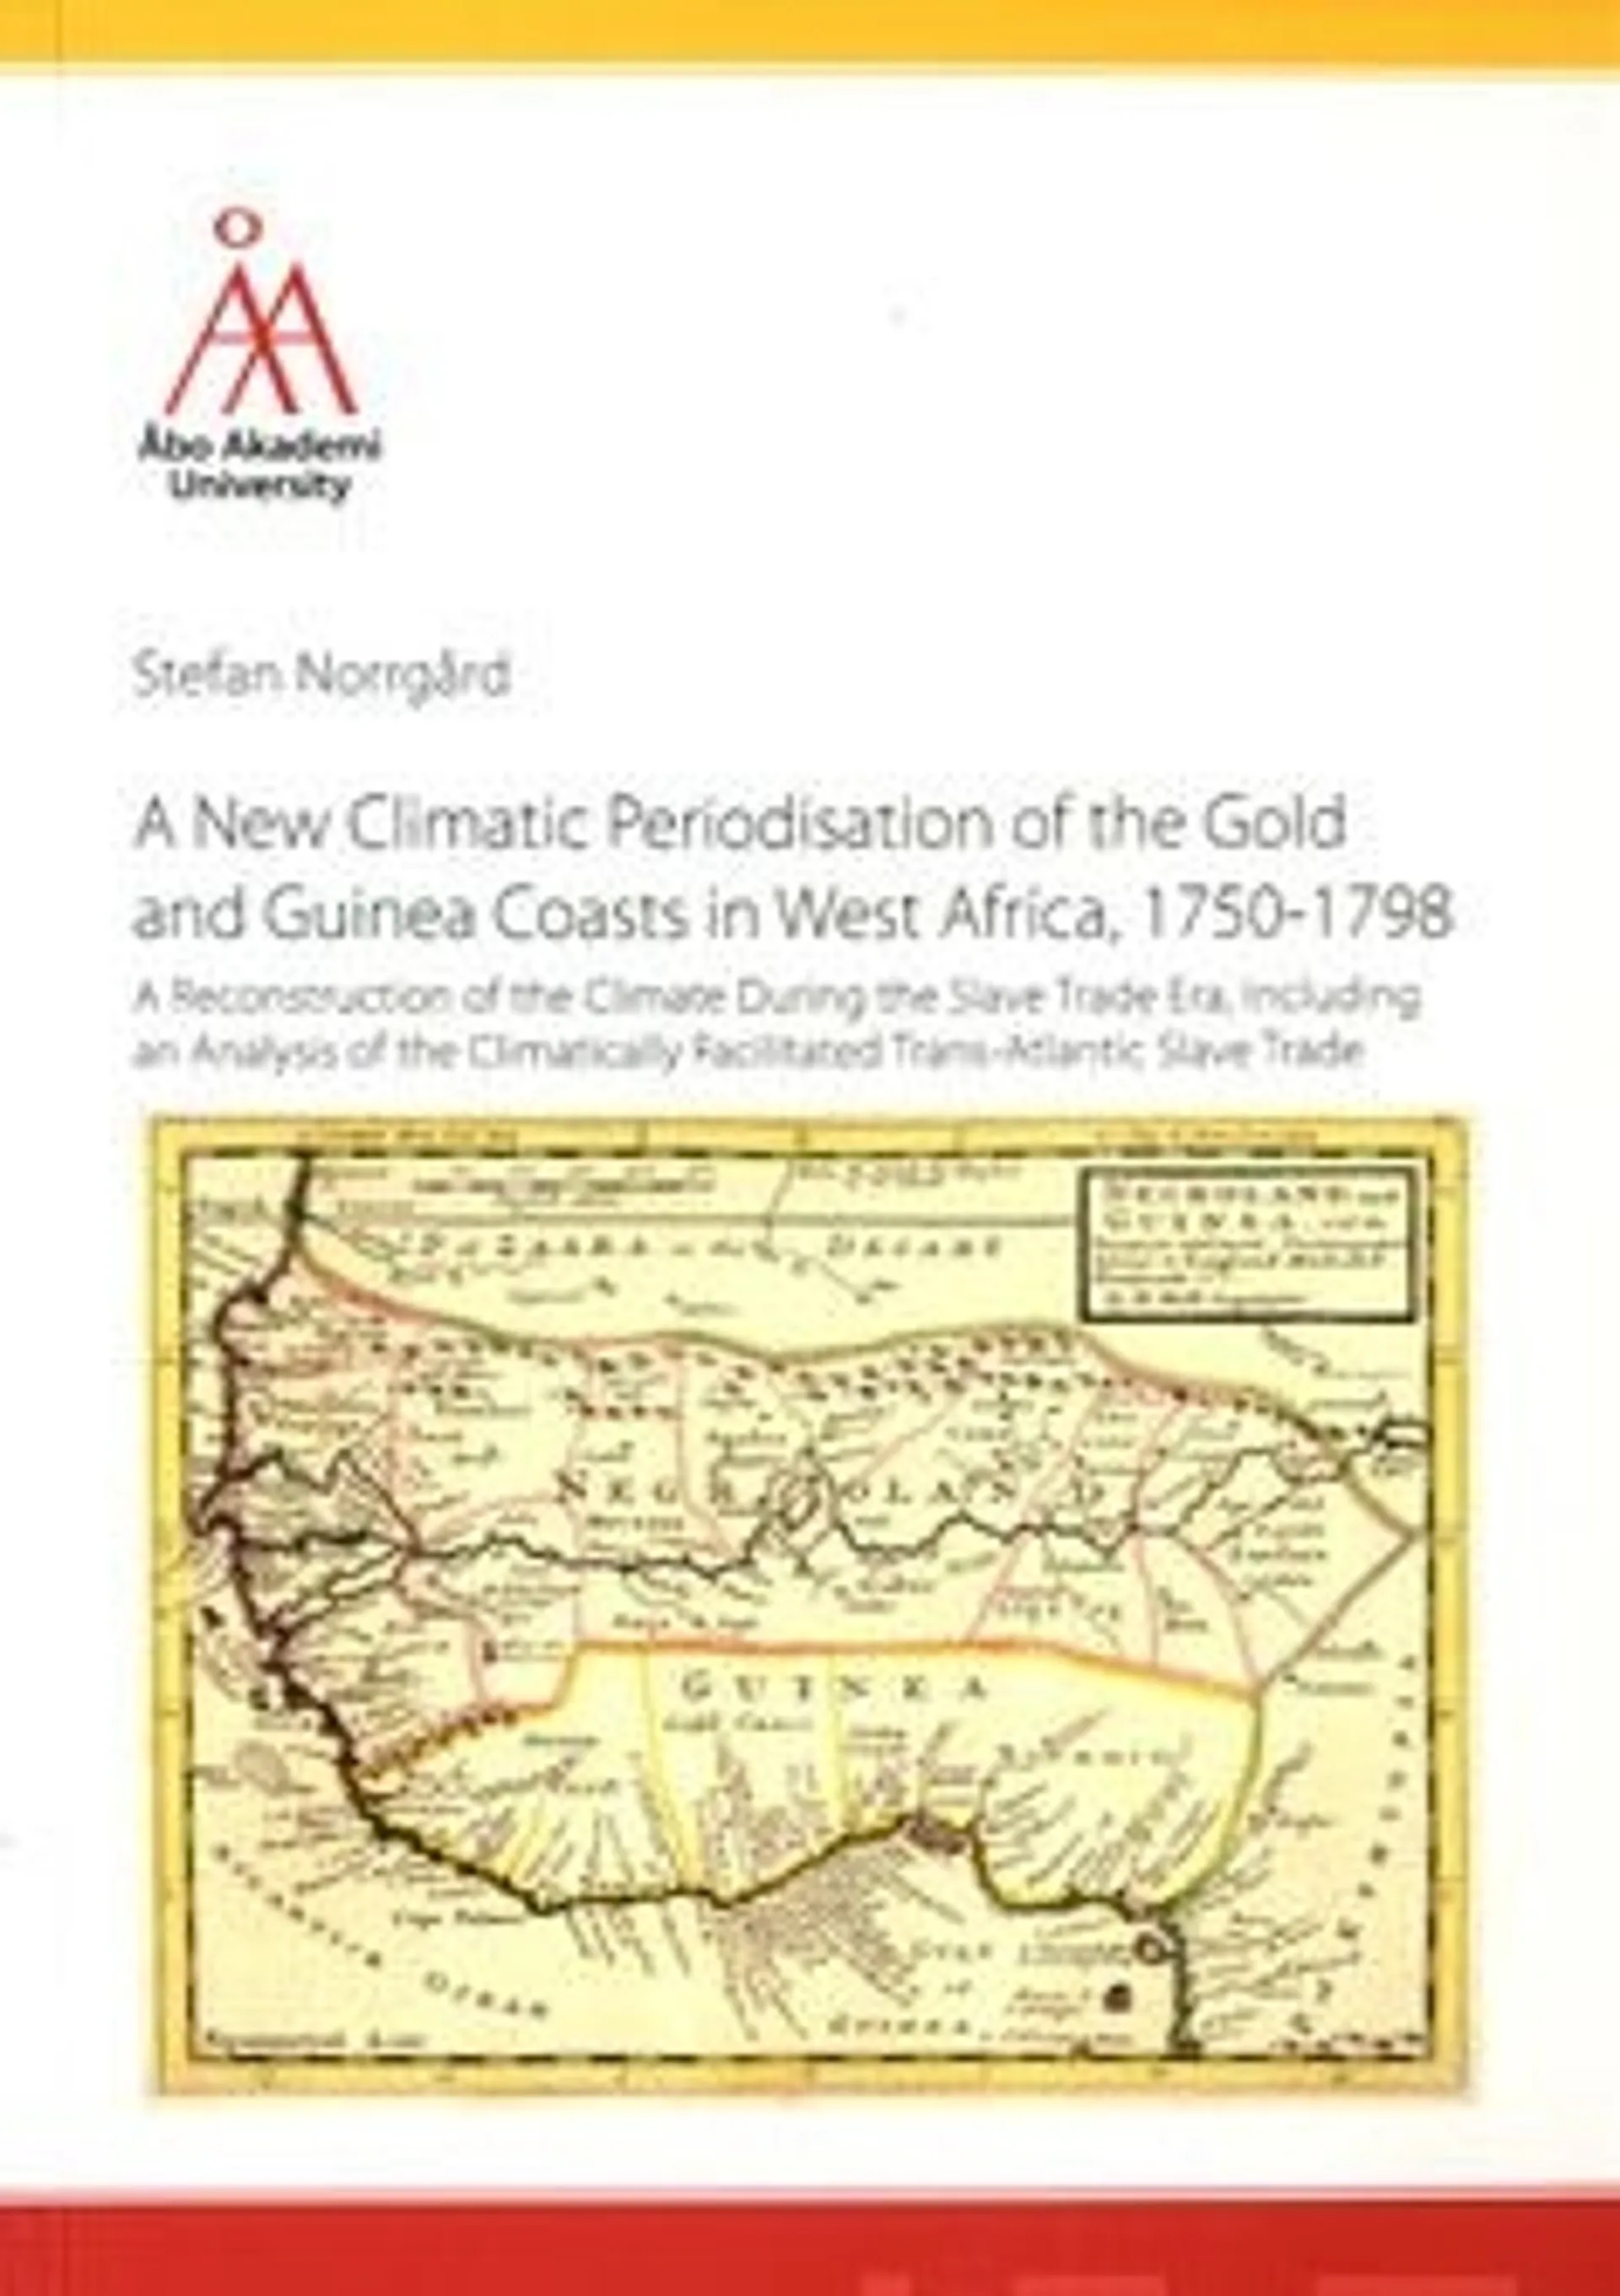 Norrgård, A New Climatic Periodisation of the Gold and Guinea Coasts in West Africa, 1750-1798